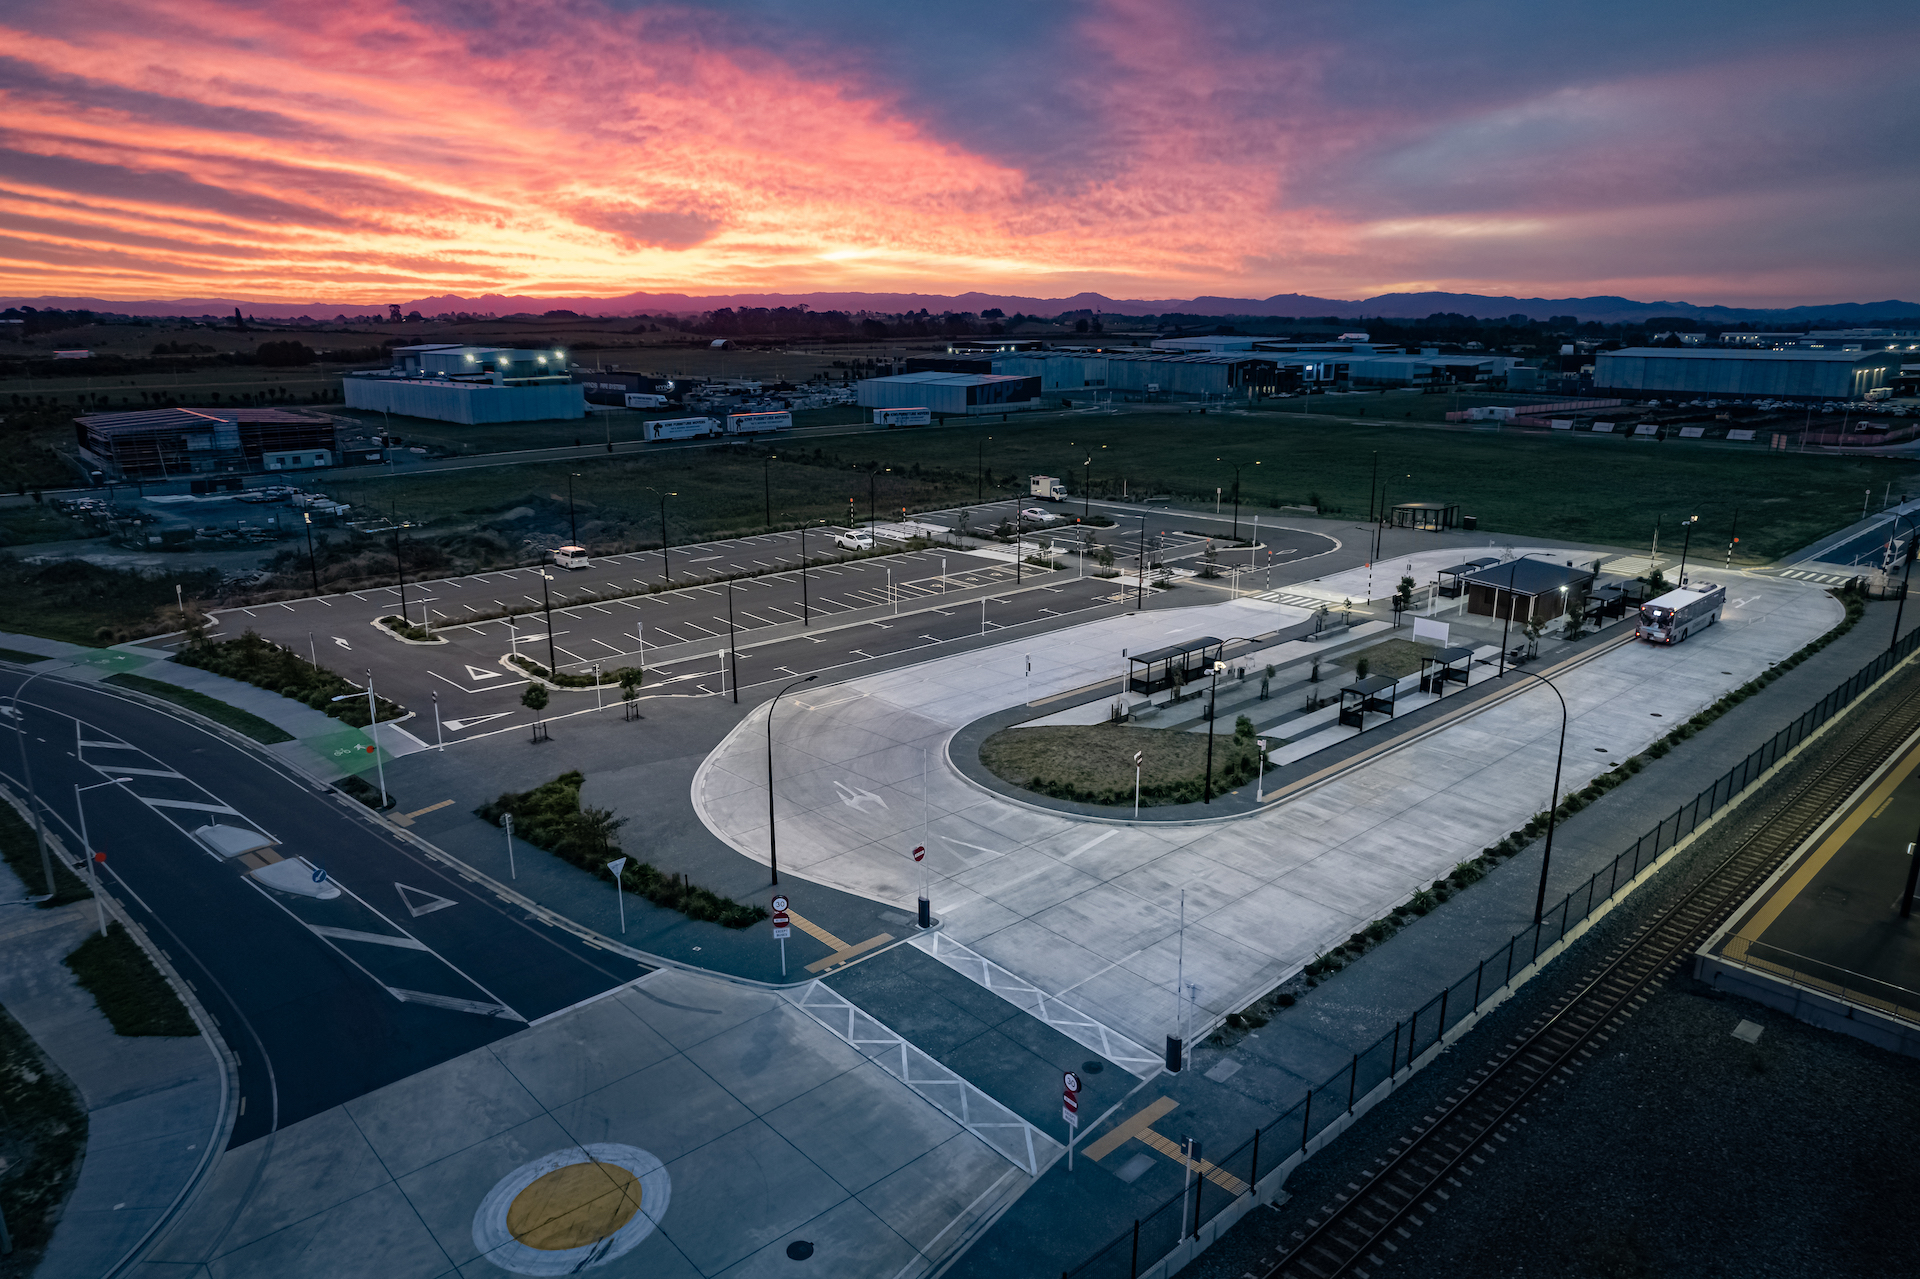 Overview of Rotokauri parking at sunset illuminated by ibex lighting solutions.